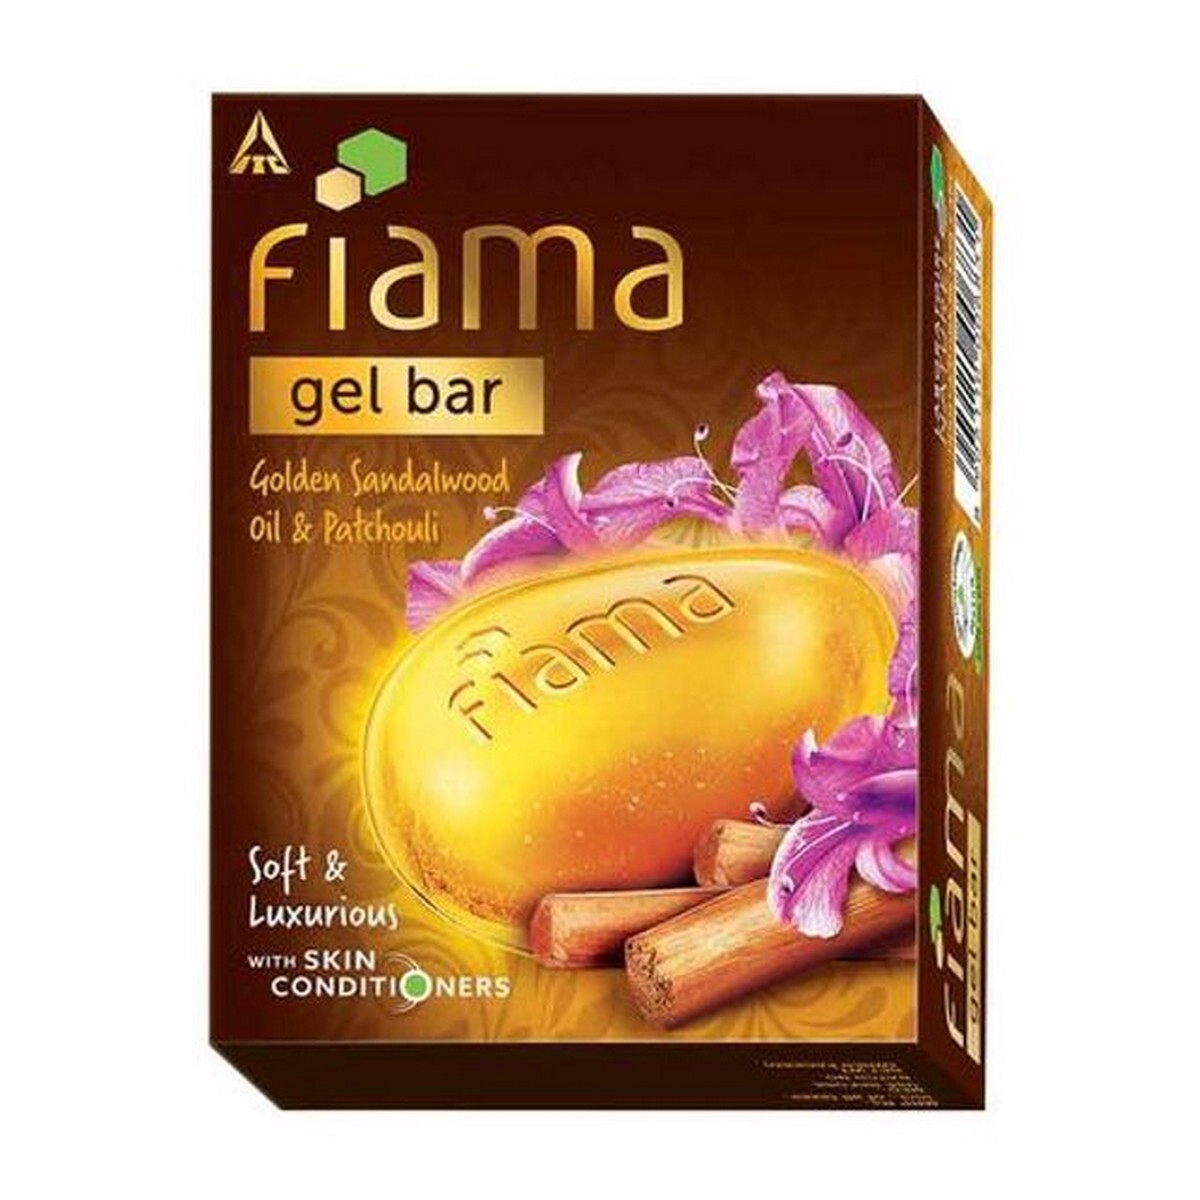 Fiama Gel Bathing Bar - Golden Sandalwood Oil & Patchouli With Conditioners For Soft & Luxurious Skin, 125 G